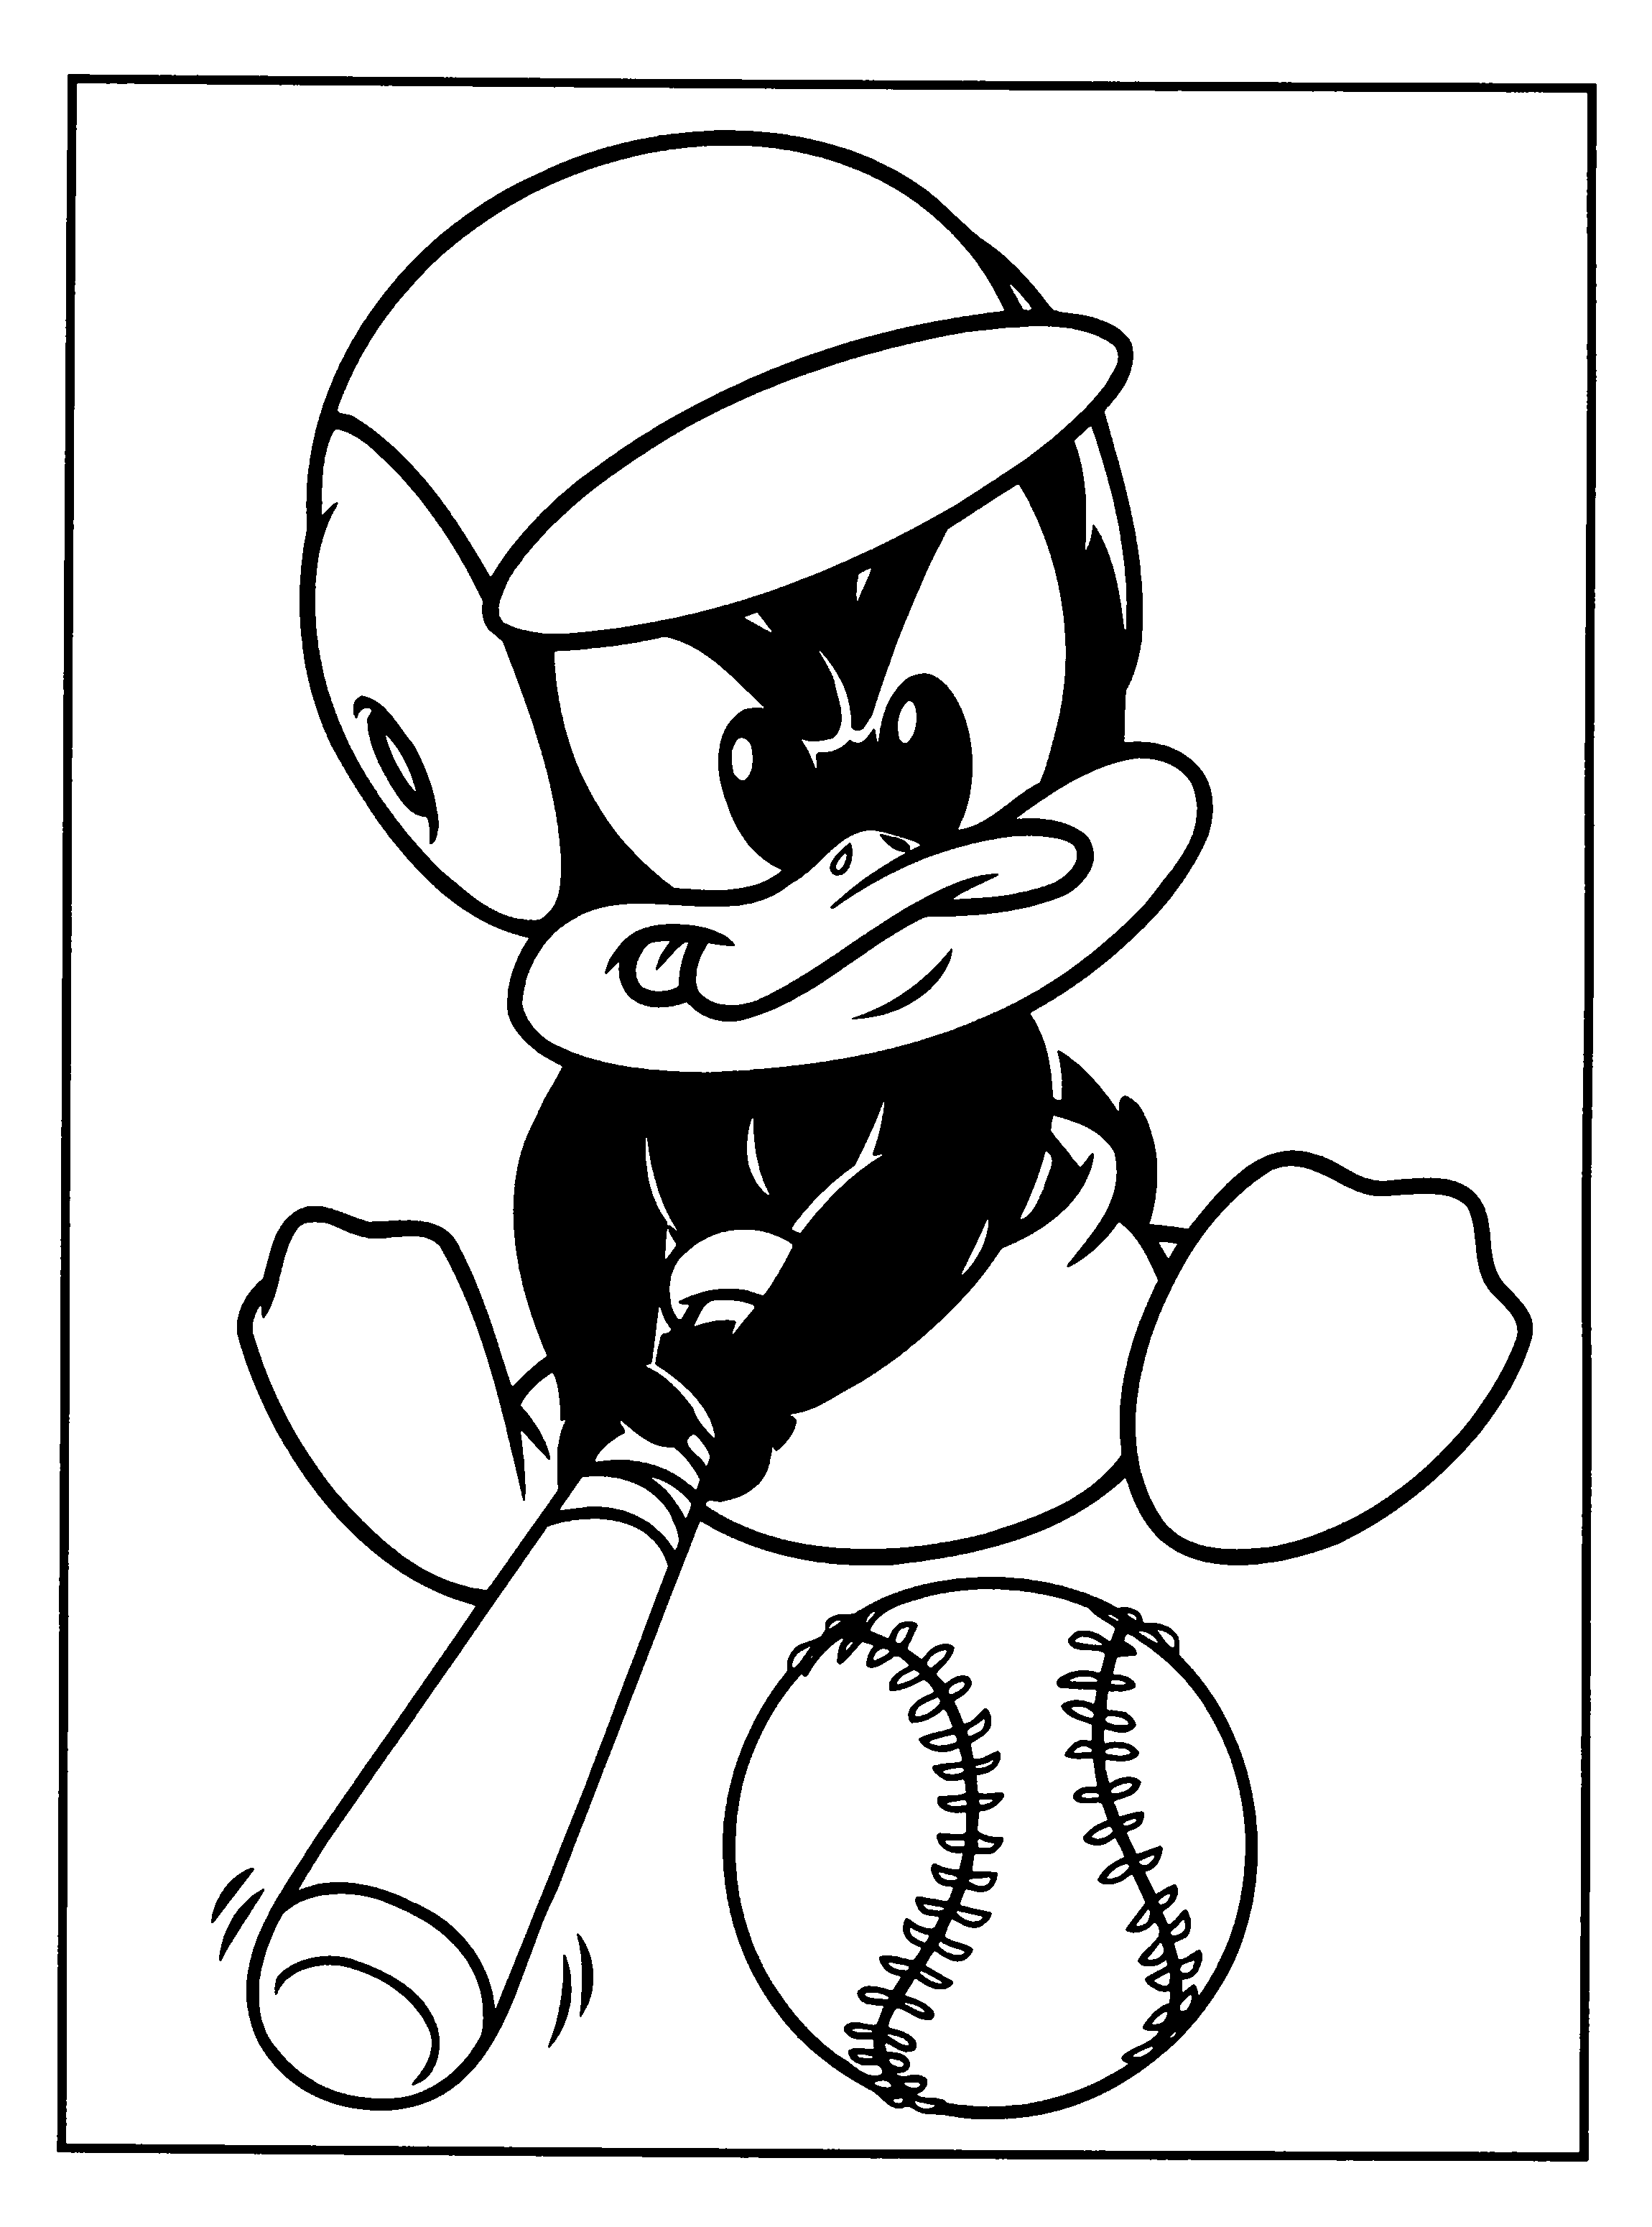 baby looney tunes coloring pages fun coloring pages baby looney tunes coloring pages tunes coloring looney baby pages 